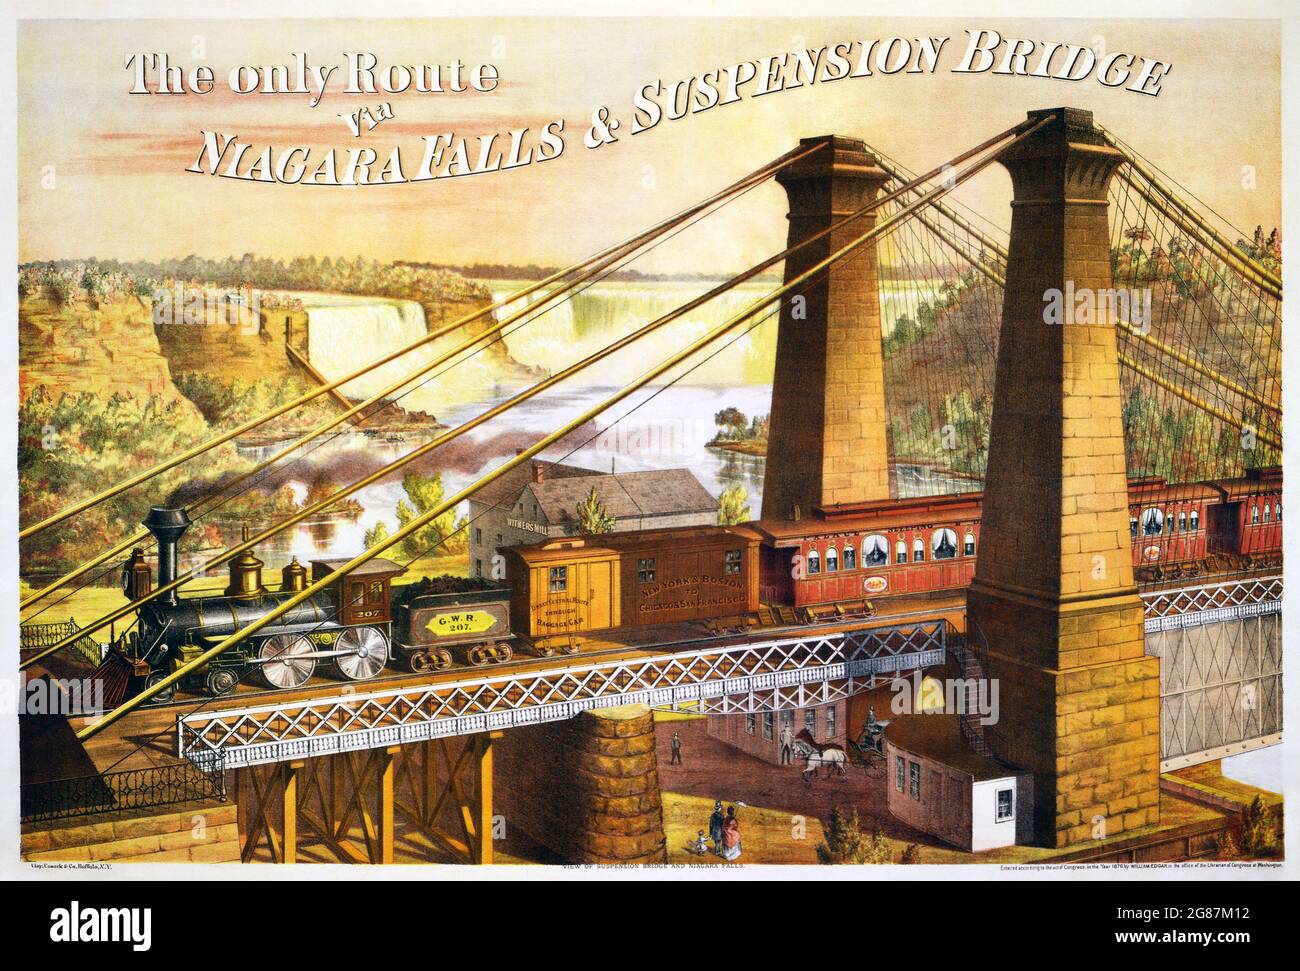 Advertisement for Great Western Railway's Niagara Falls Suspension Bridge—'The only route via Niagara Falls & Suspension Bridge'  c 1876 Stock Photo